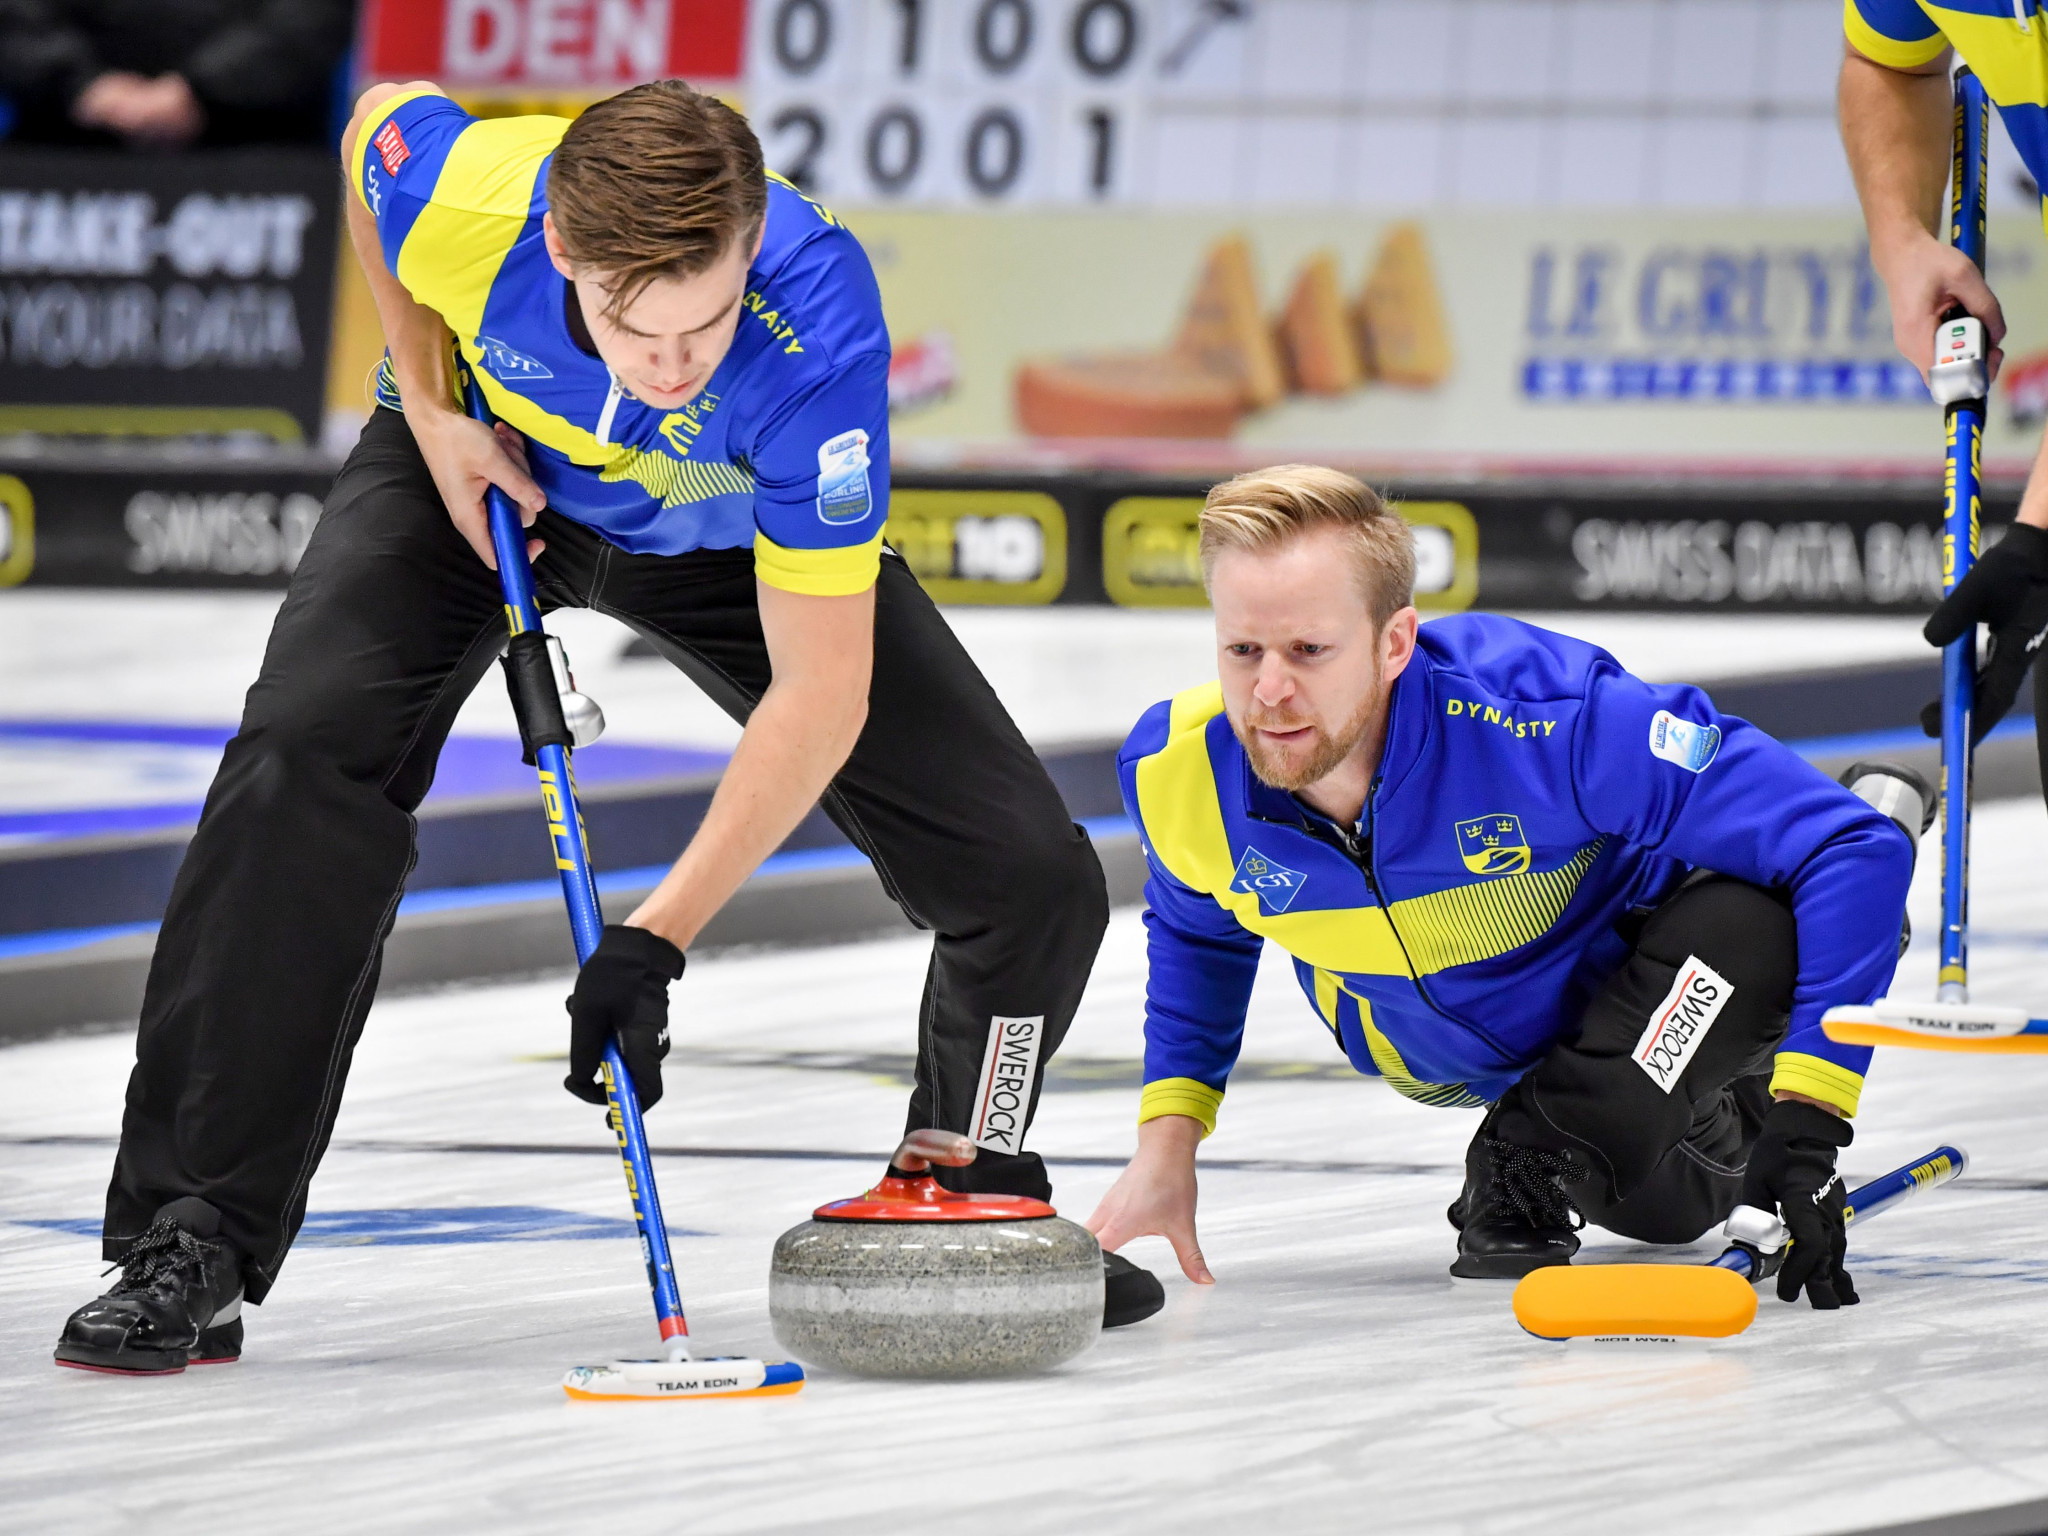 Sweden will be looking to defend their title in Calgary next year ©Getty Images